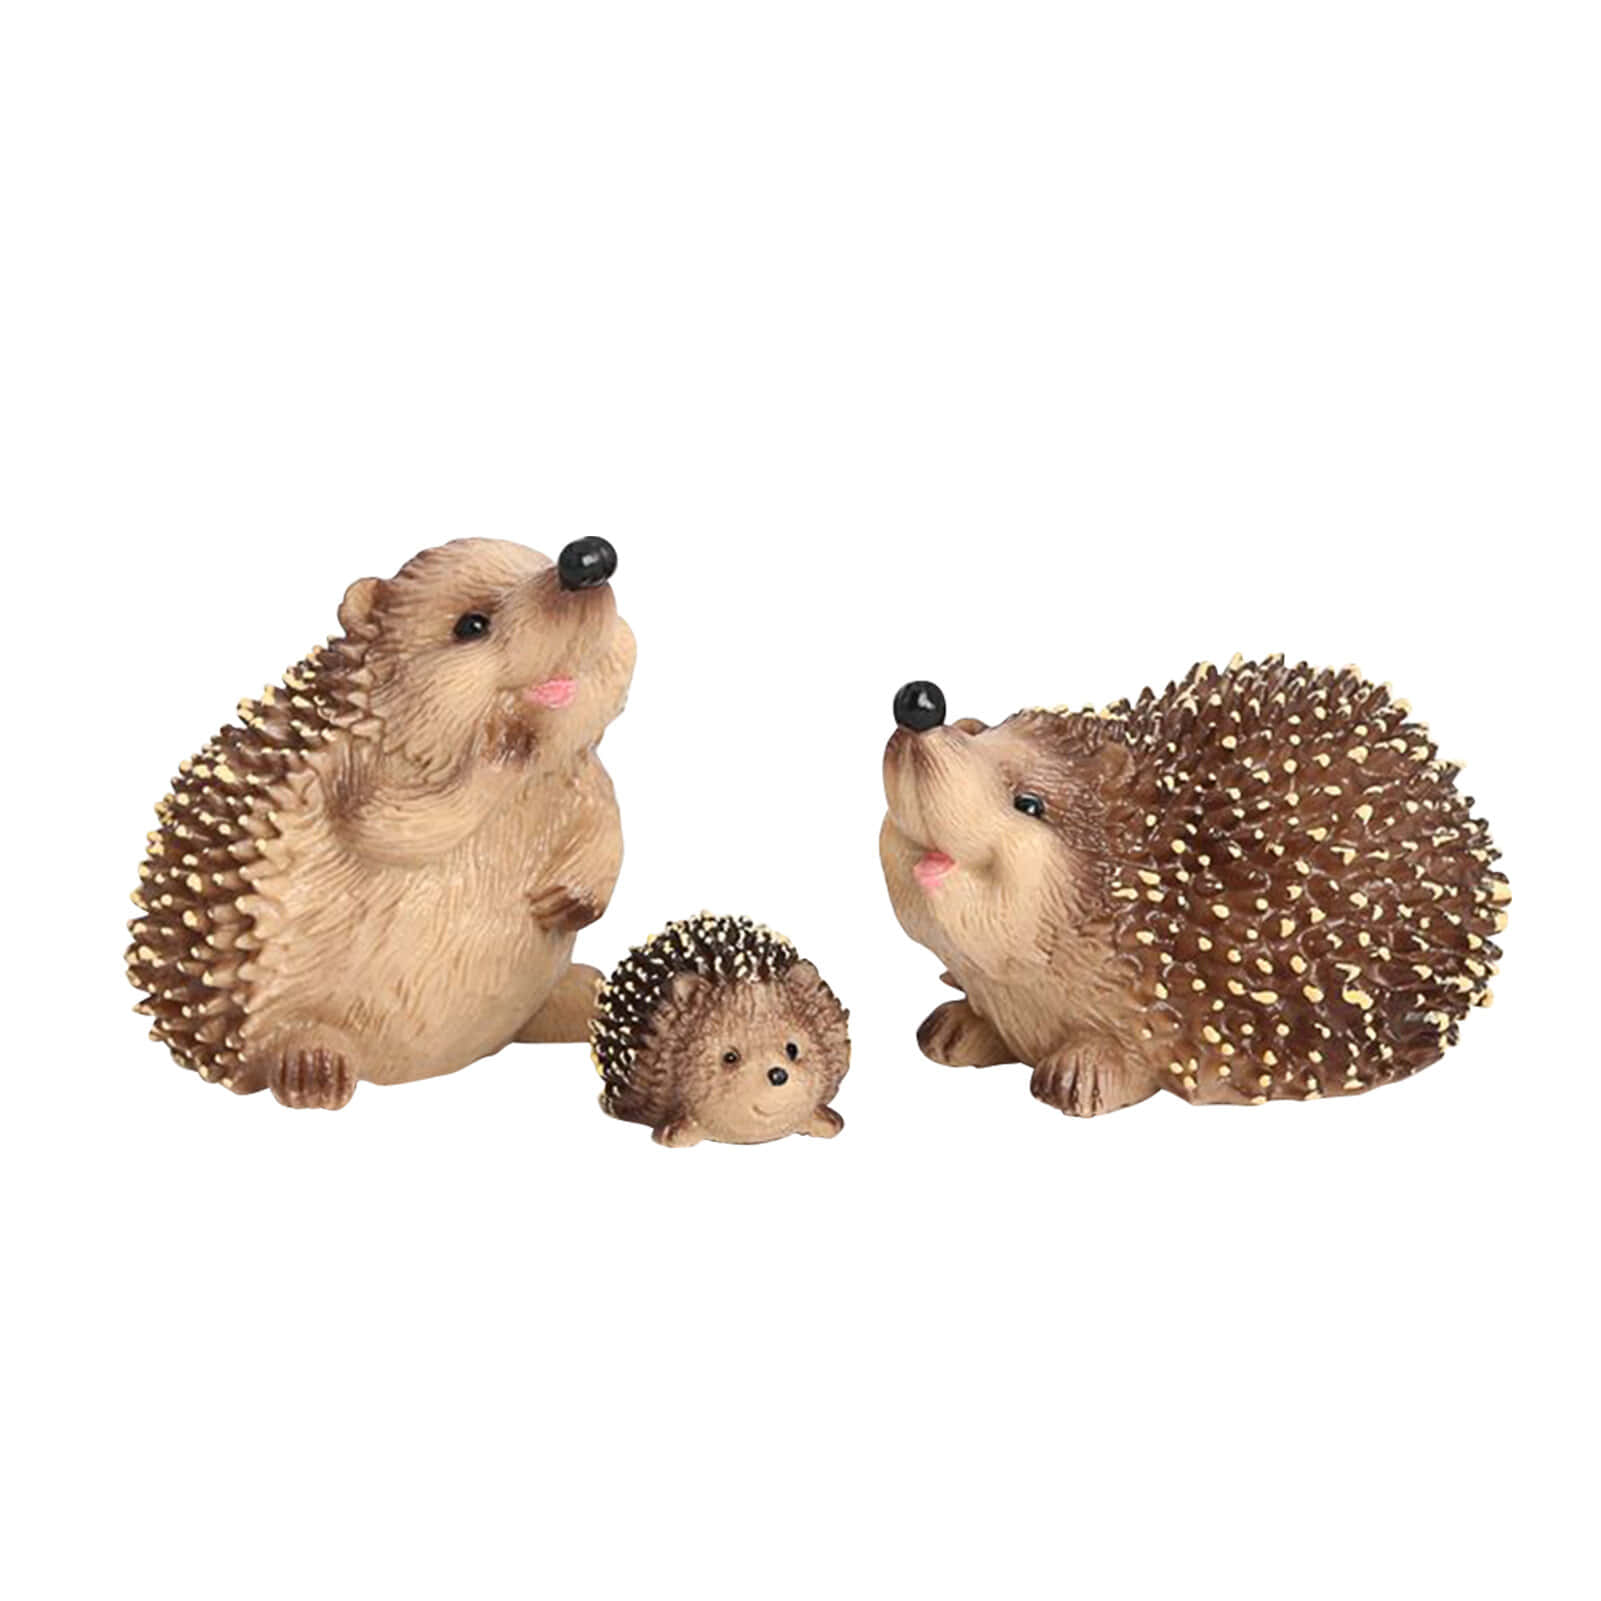 Cute Hedgehog Family Toys On White Picture